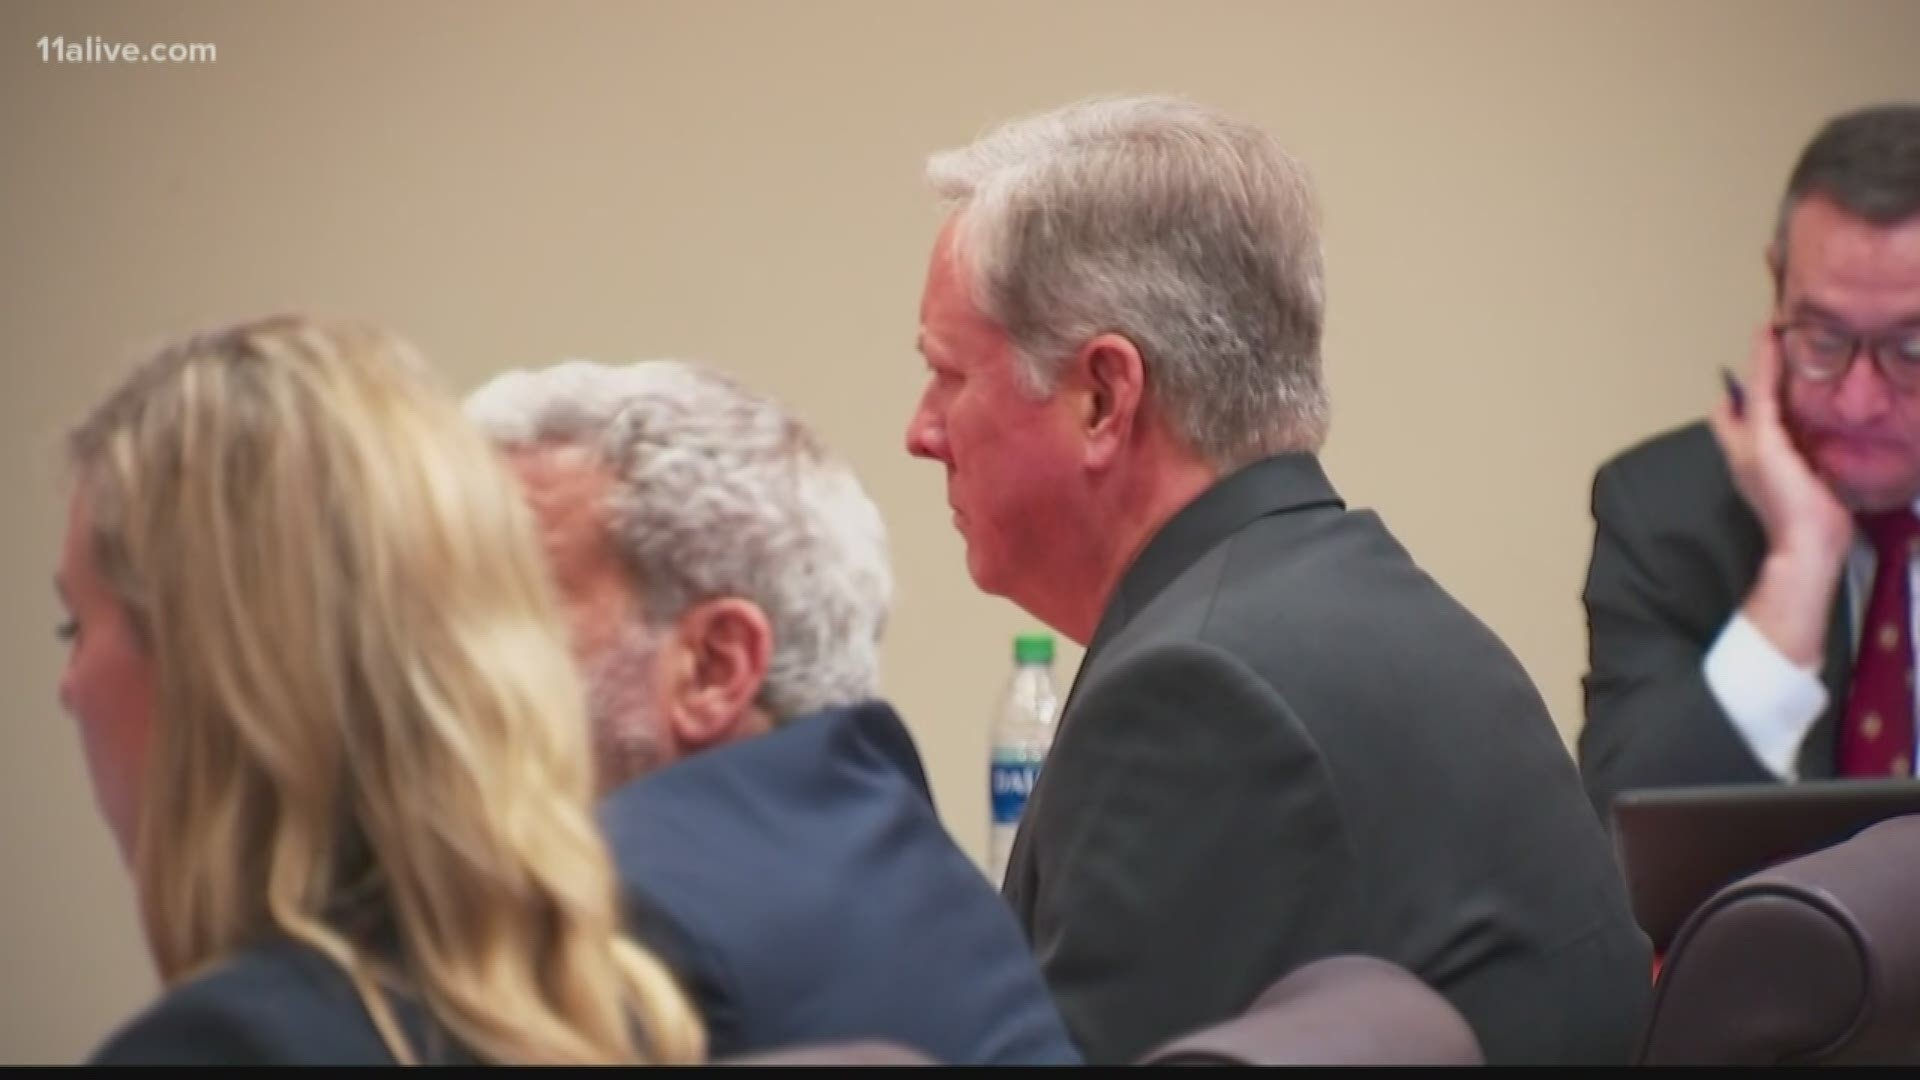 The jury asked no questions Friday in the Olsen trial. He’s facing felony murder charges for shooting an unarmed, naked veteran in DeKalb County in 2015.